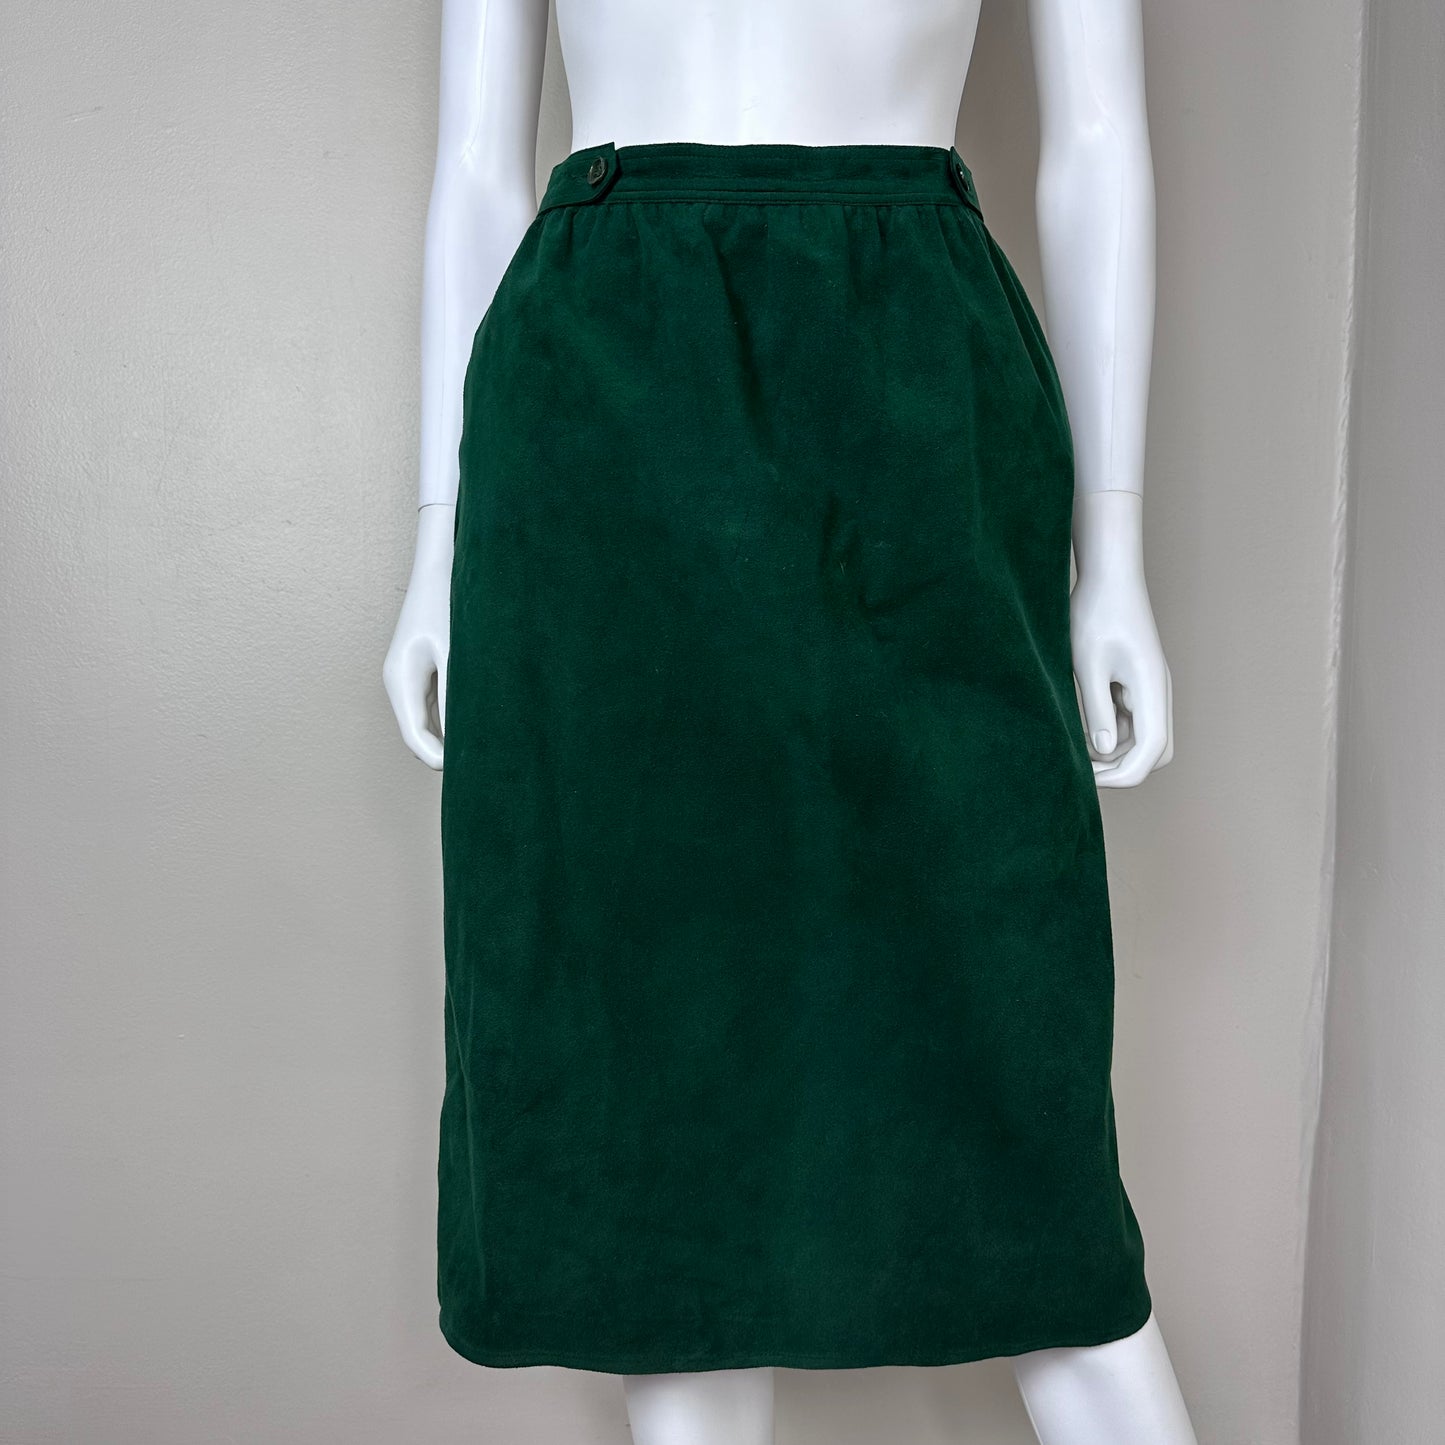 1980s Green Ultrasuede Vest and Skirt Set, Signatures by Russ Taylor Size Small-Medium